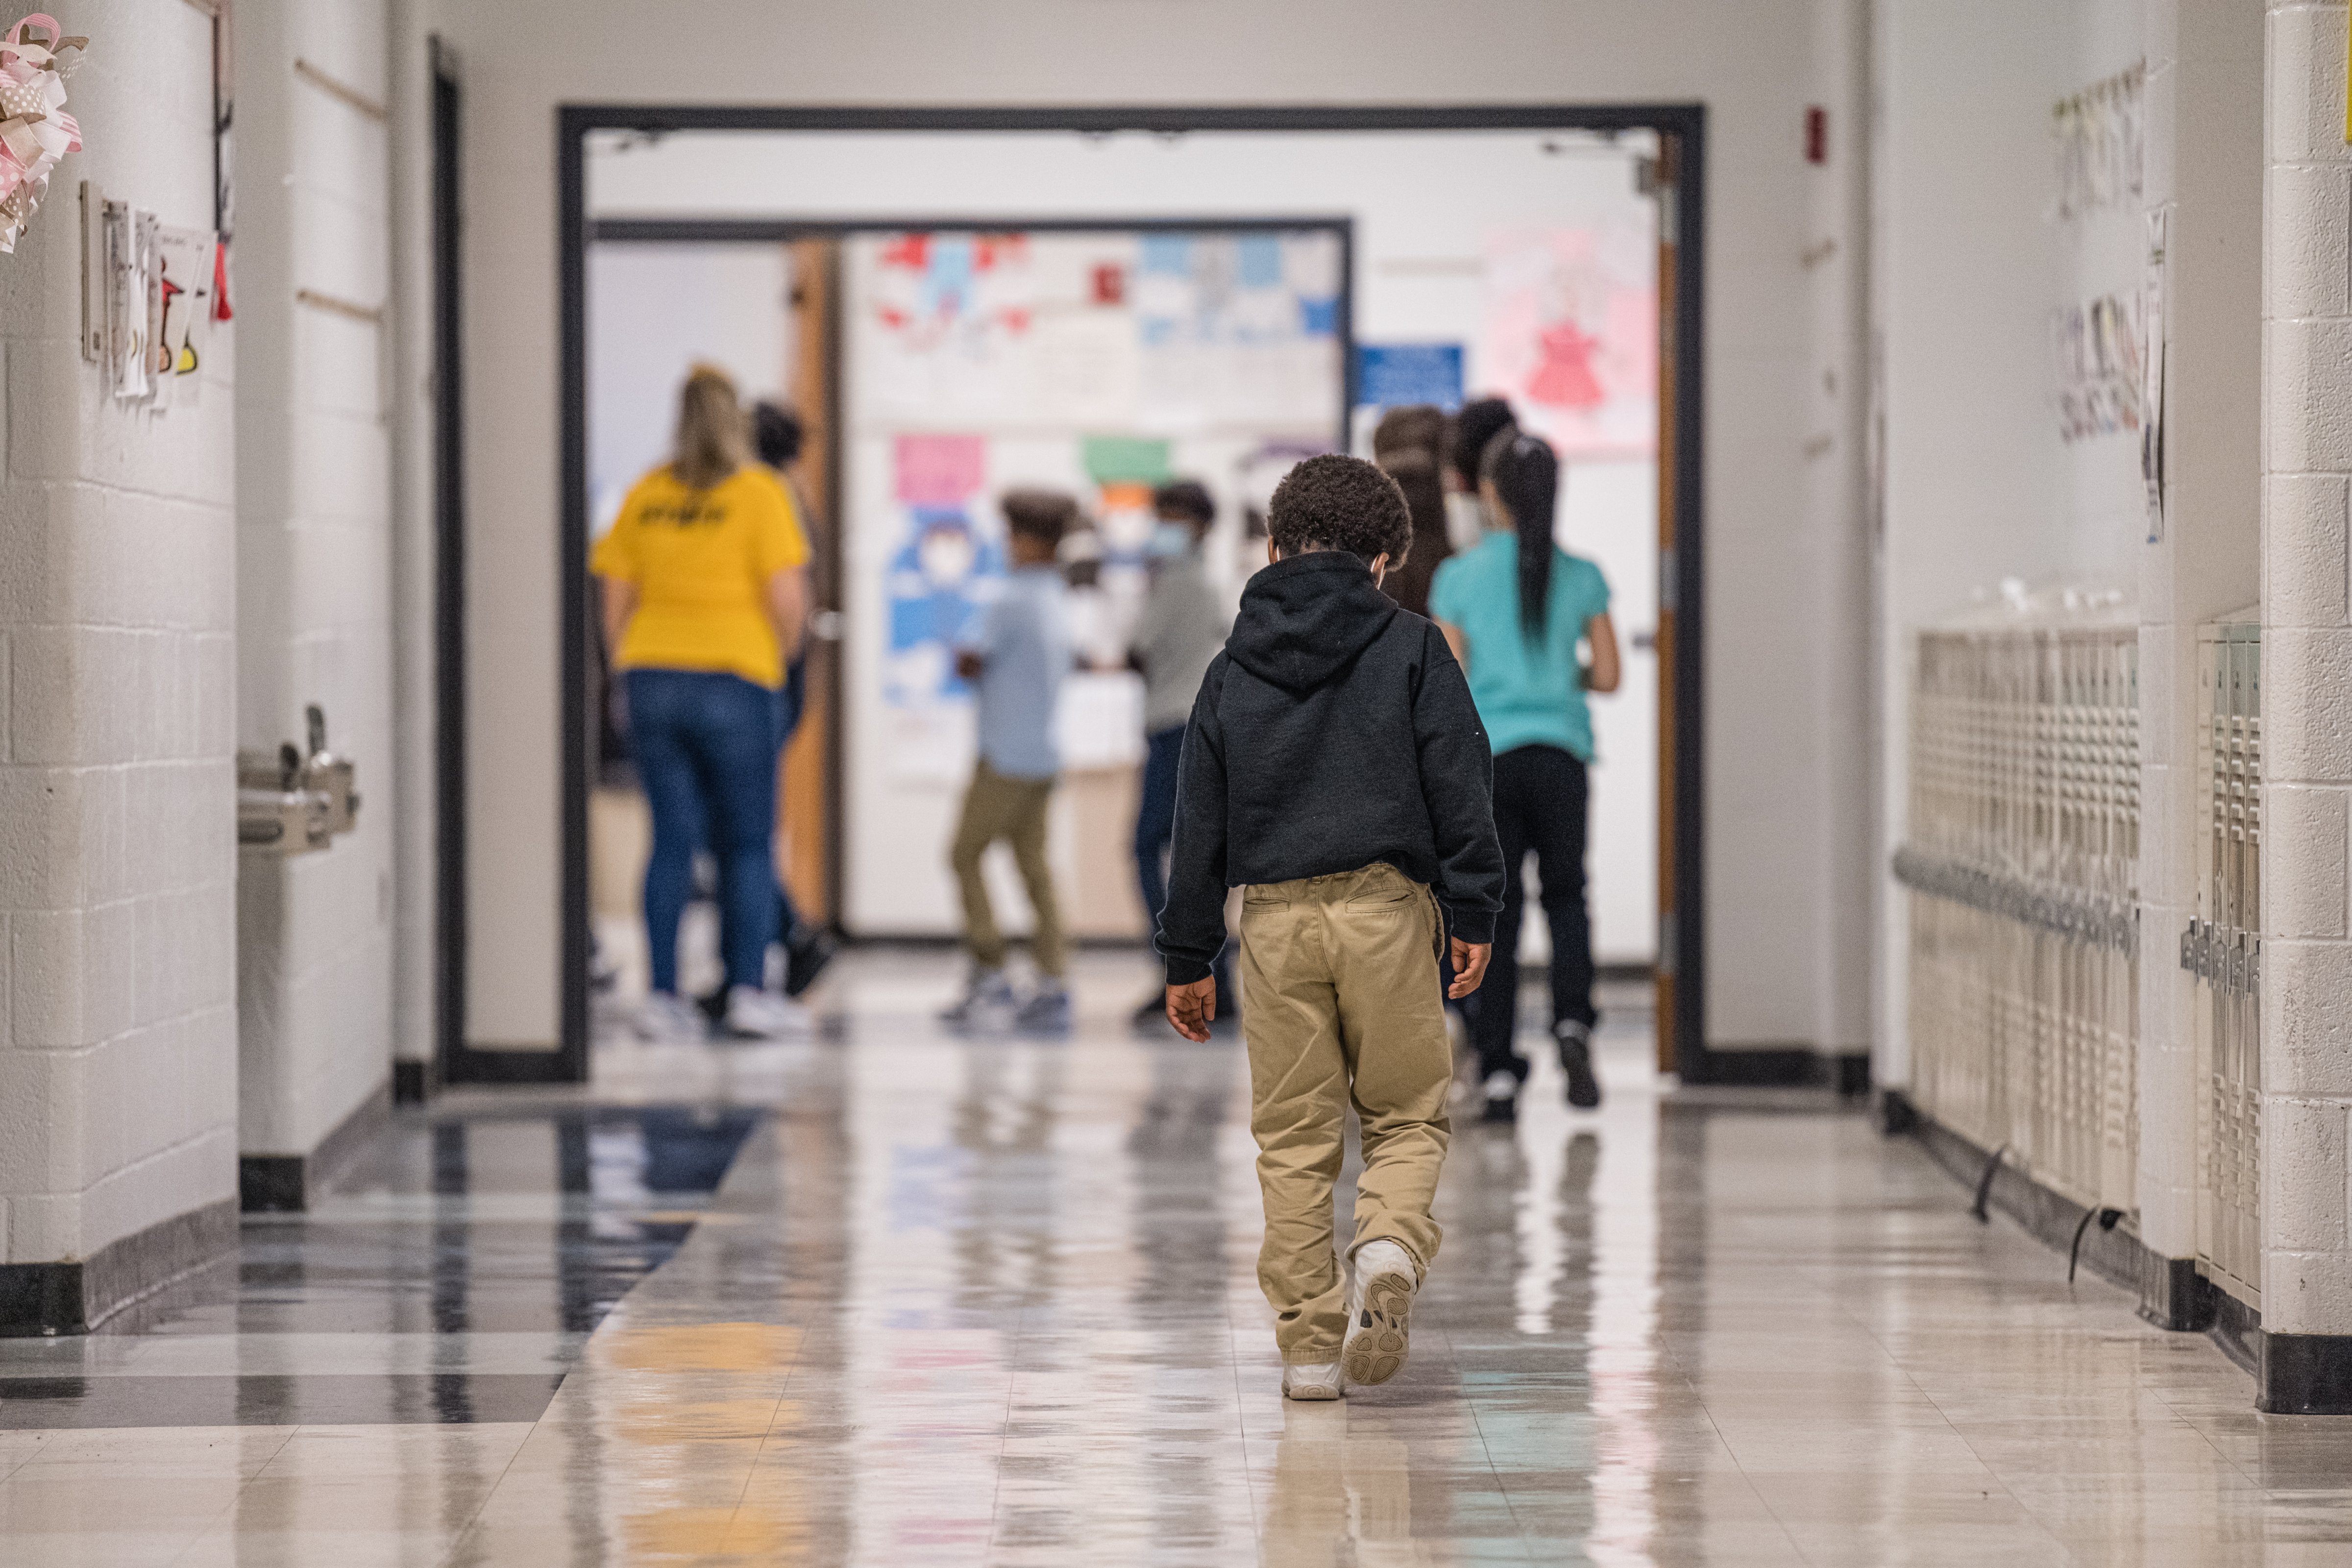 A young boy walks down a hallway at Carter Traditional Elementary School on Jan. 24, 2022 in Louisville, Ky. (Jon Cherry/Getty Images)